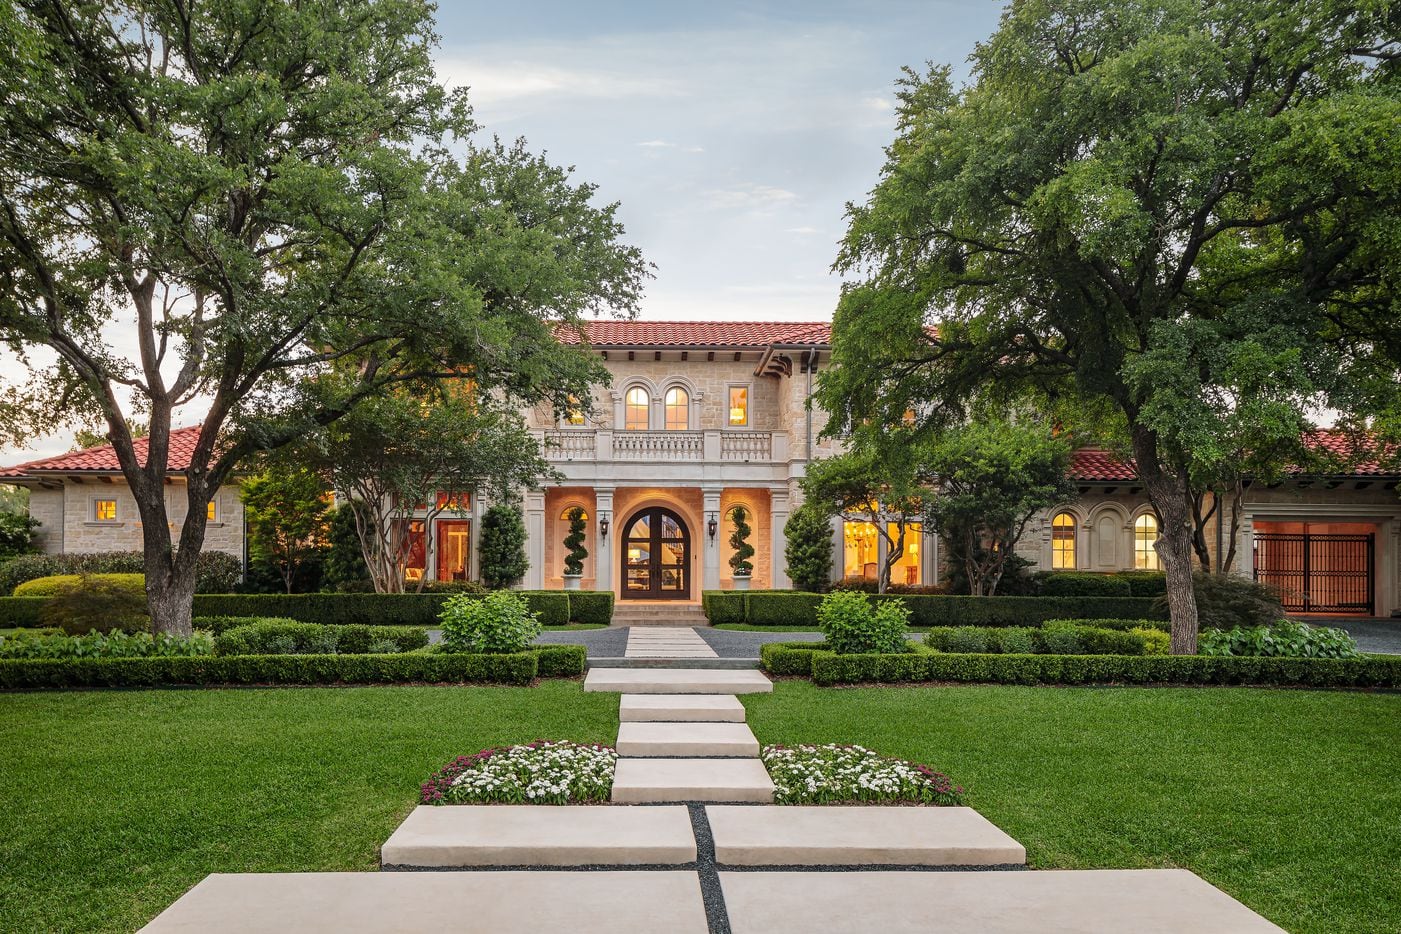 This 8,700-square-foot home at 5027 Radbrook Place in Dallas' Preston Hollow neighborhood is listed for $4,795,000.